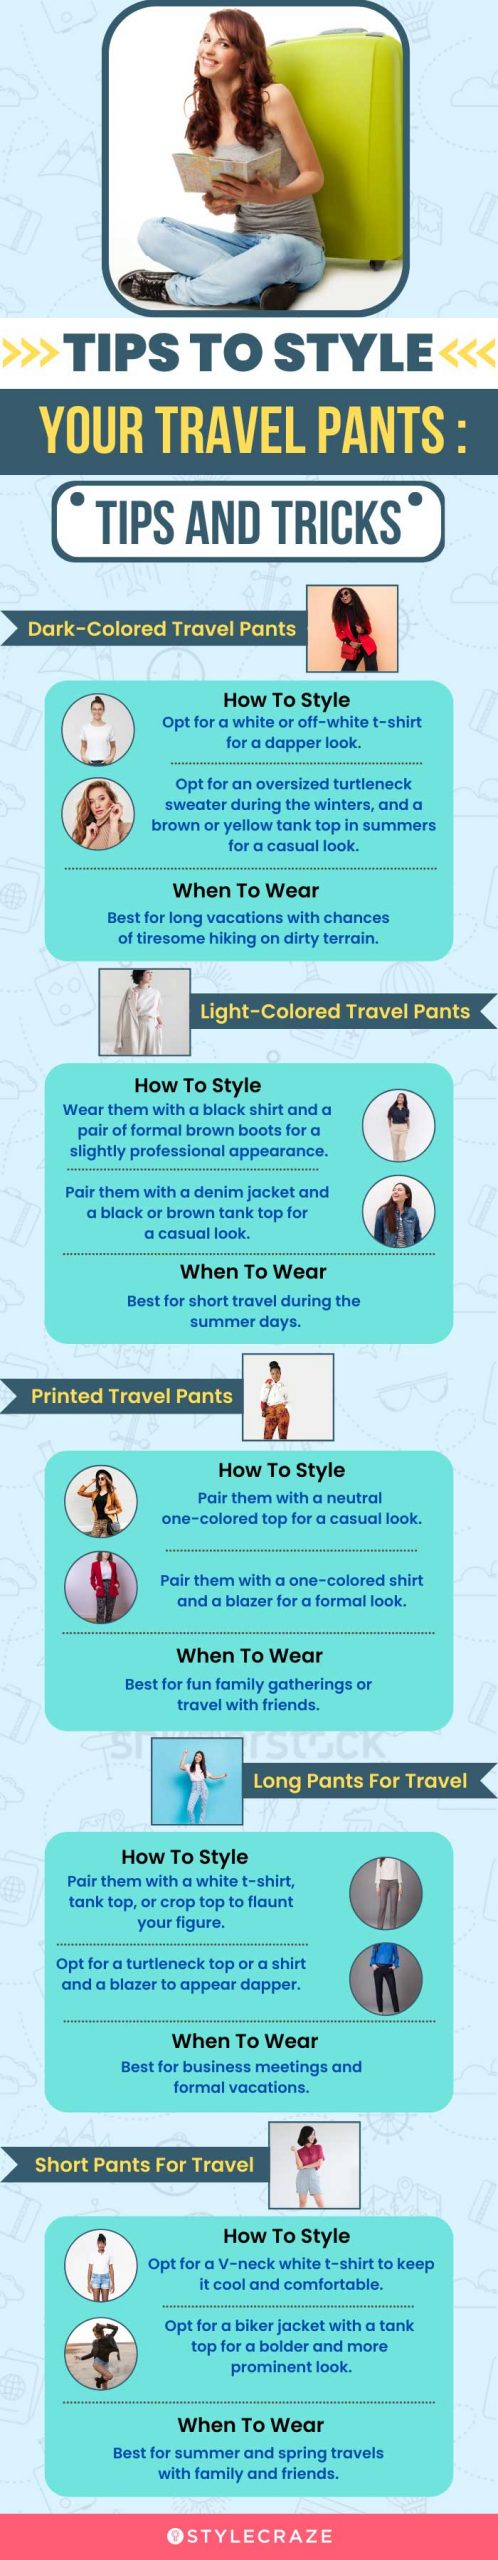 Tips To Style Your Travel Pants Tips And Tricks (infographic)